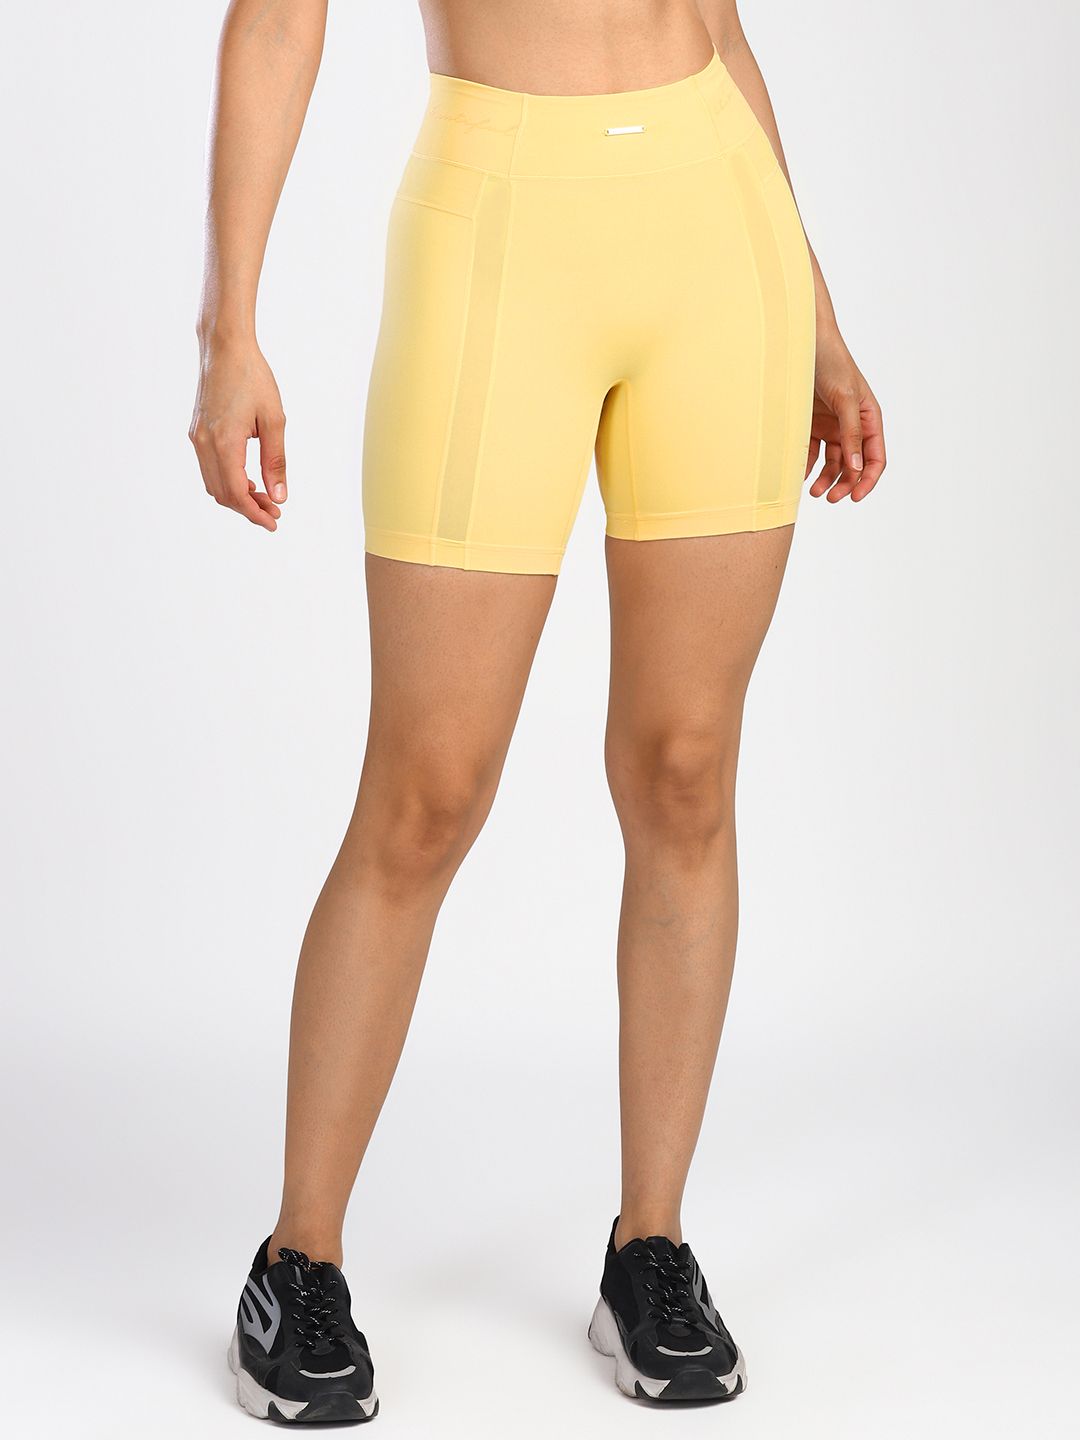 Gymshark Women Cycling Shorts Price in India